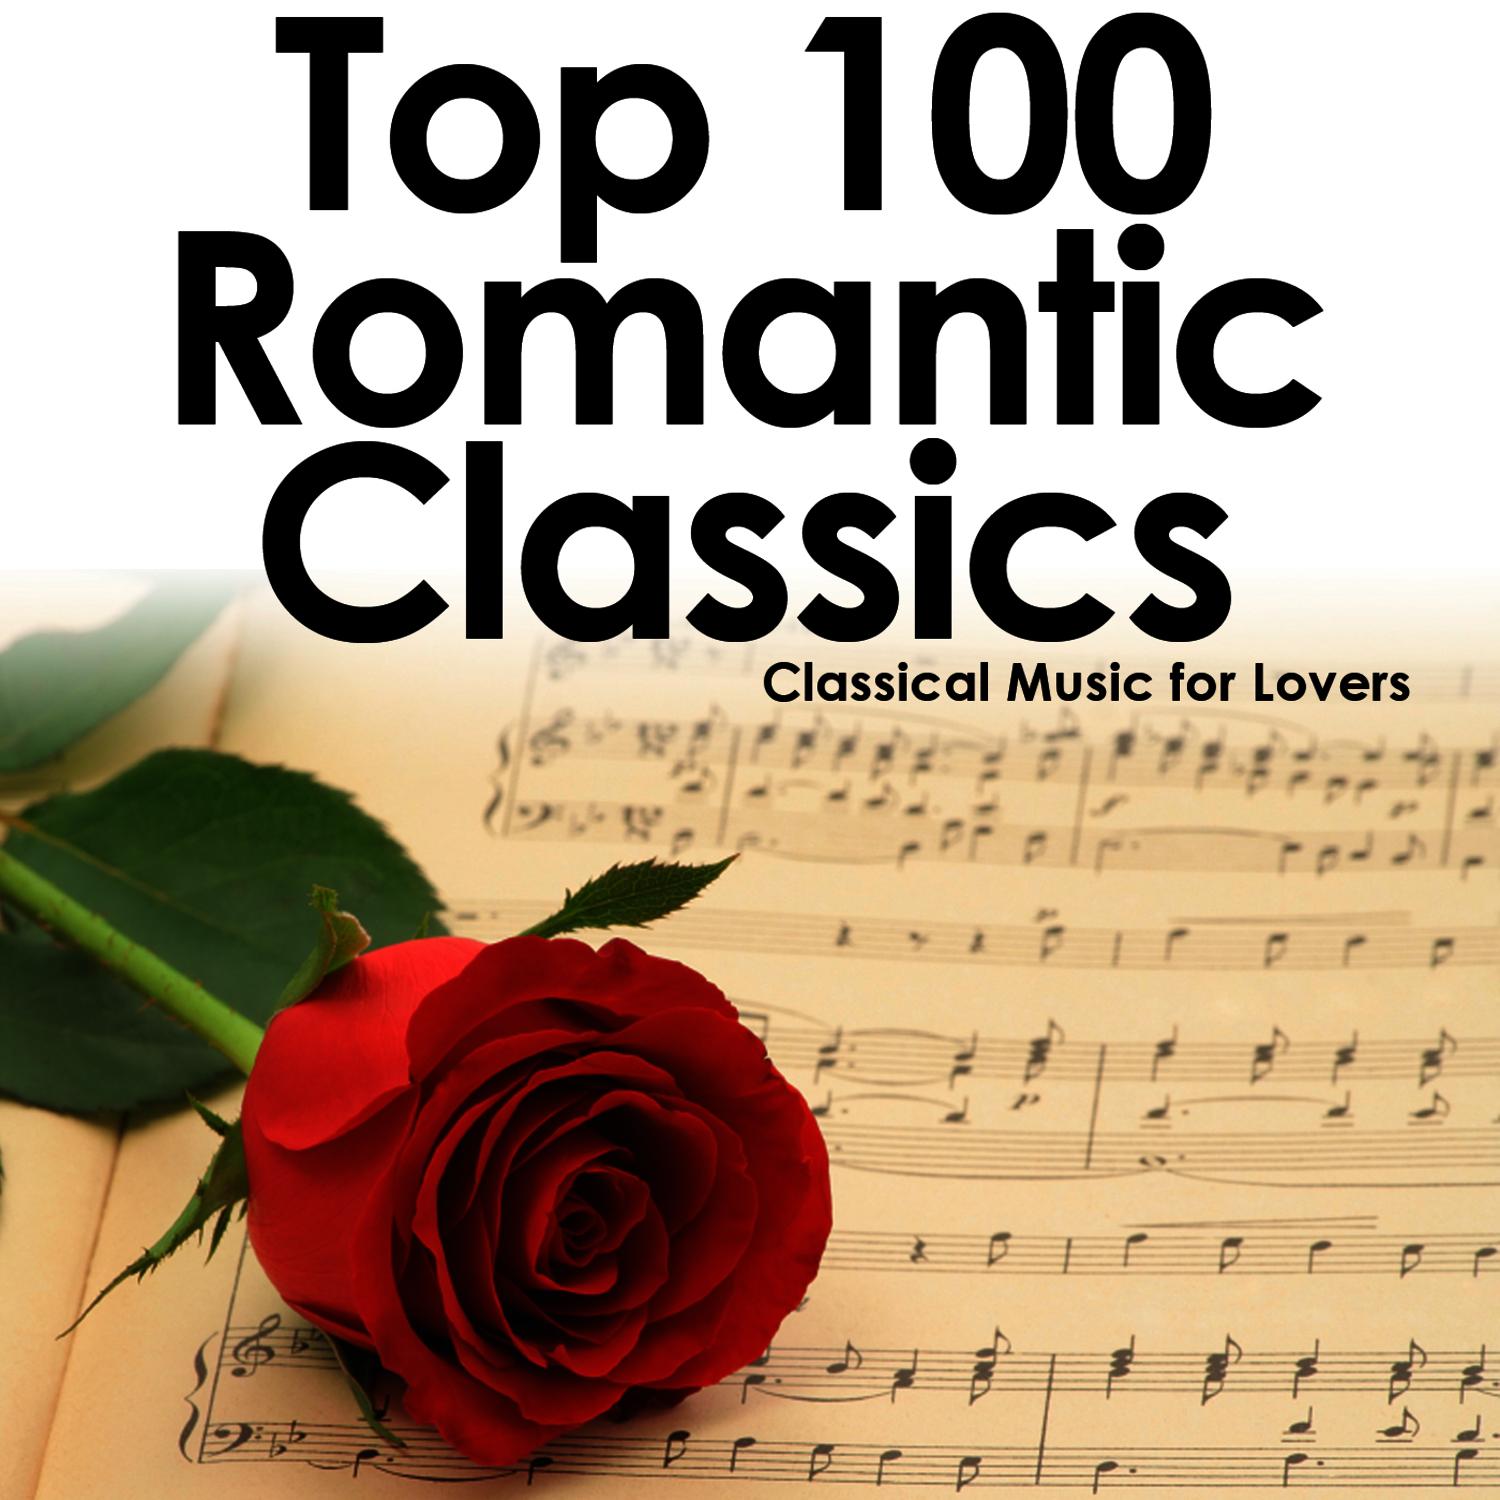 Top 100 Romantic Classics: Classical Music for Lovers